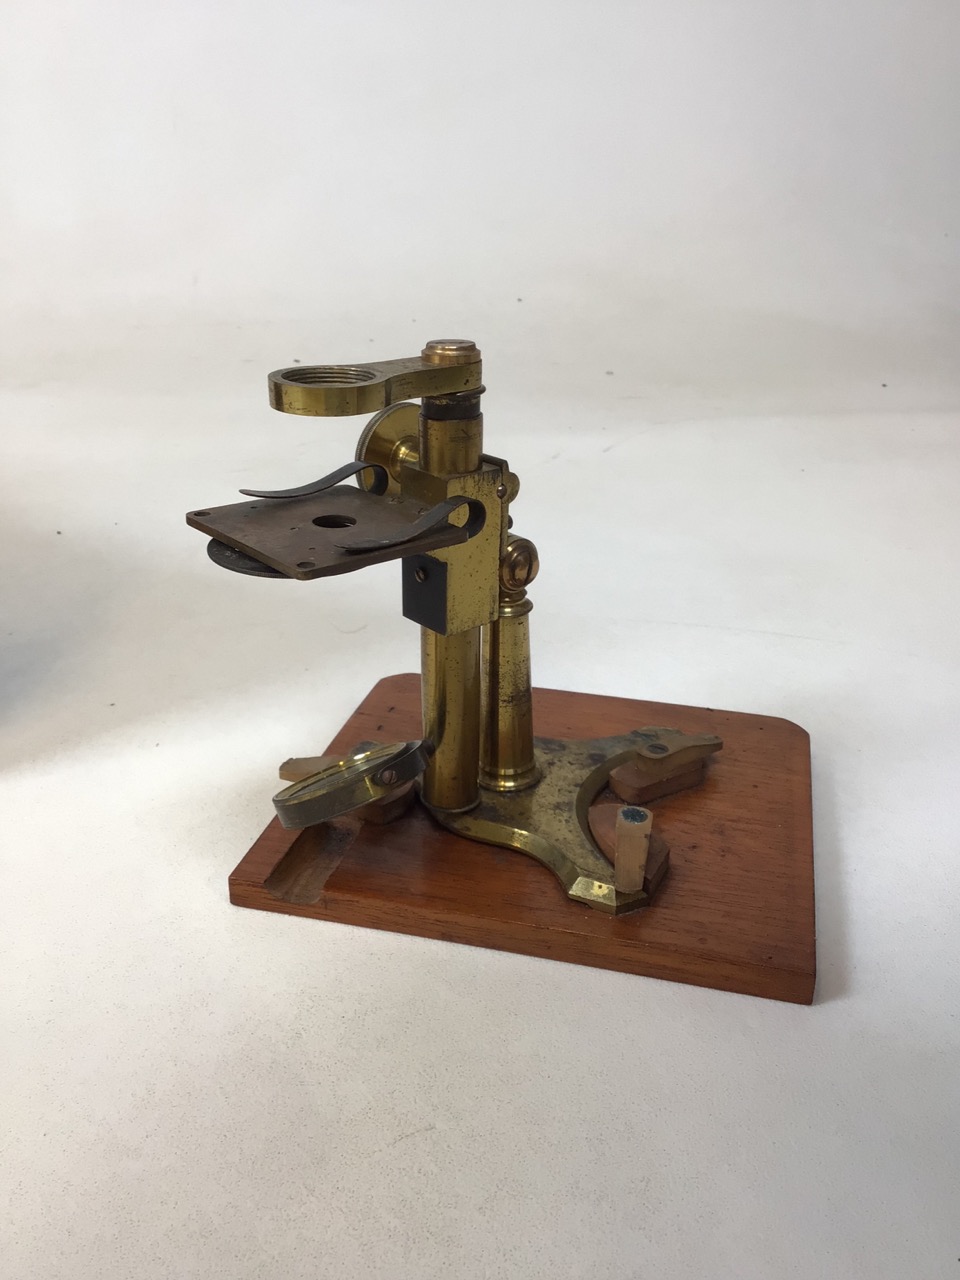 A brass microscope by Negretti & Zambra in original mahogany case with lenses and slides W:18cm x - Image 3 of 7